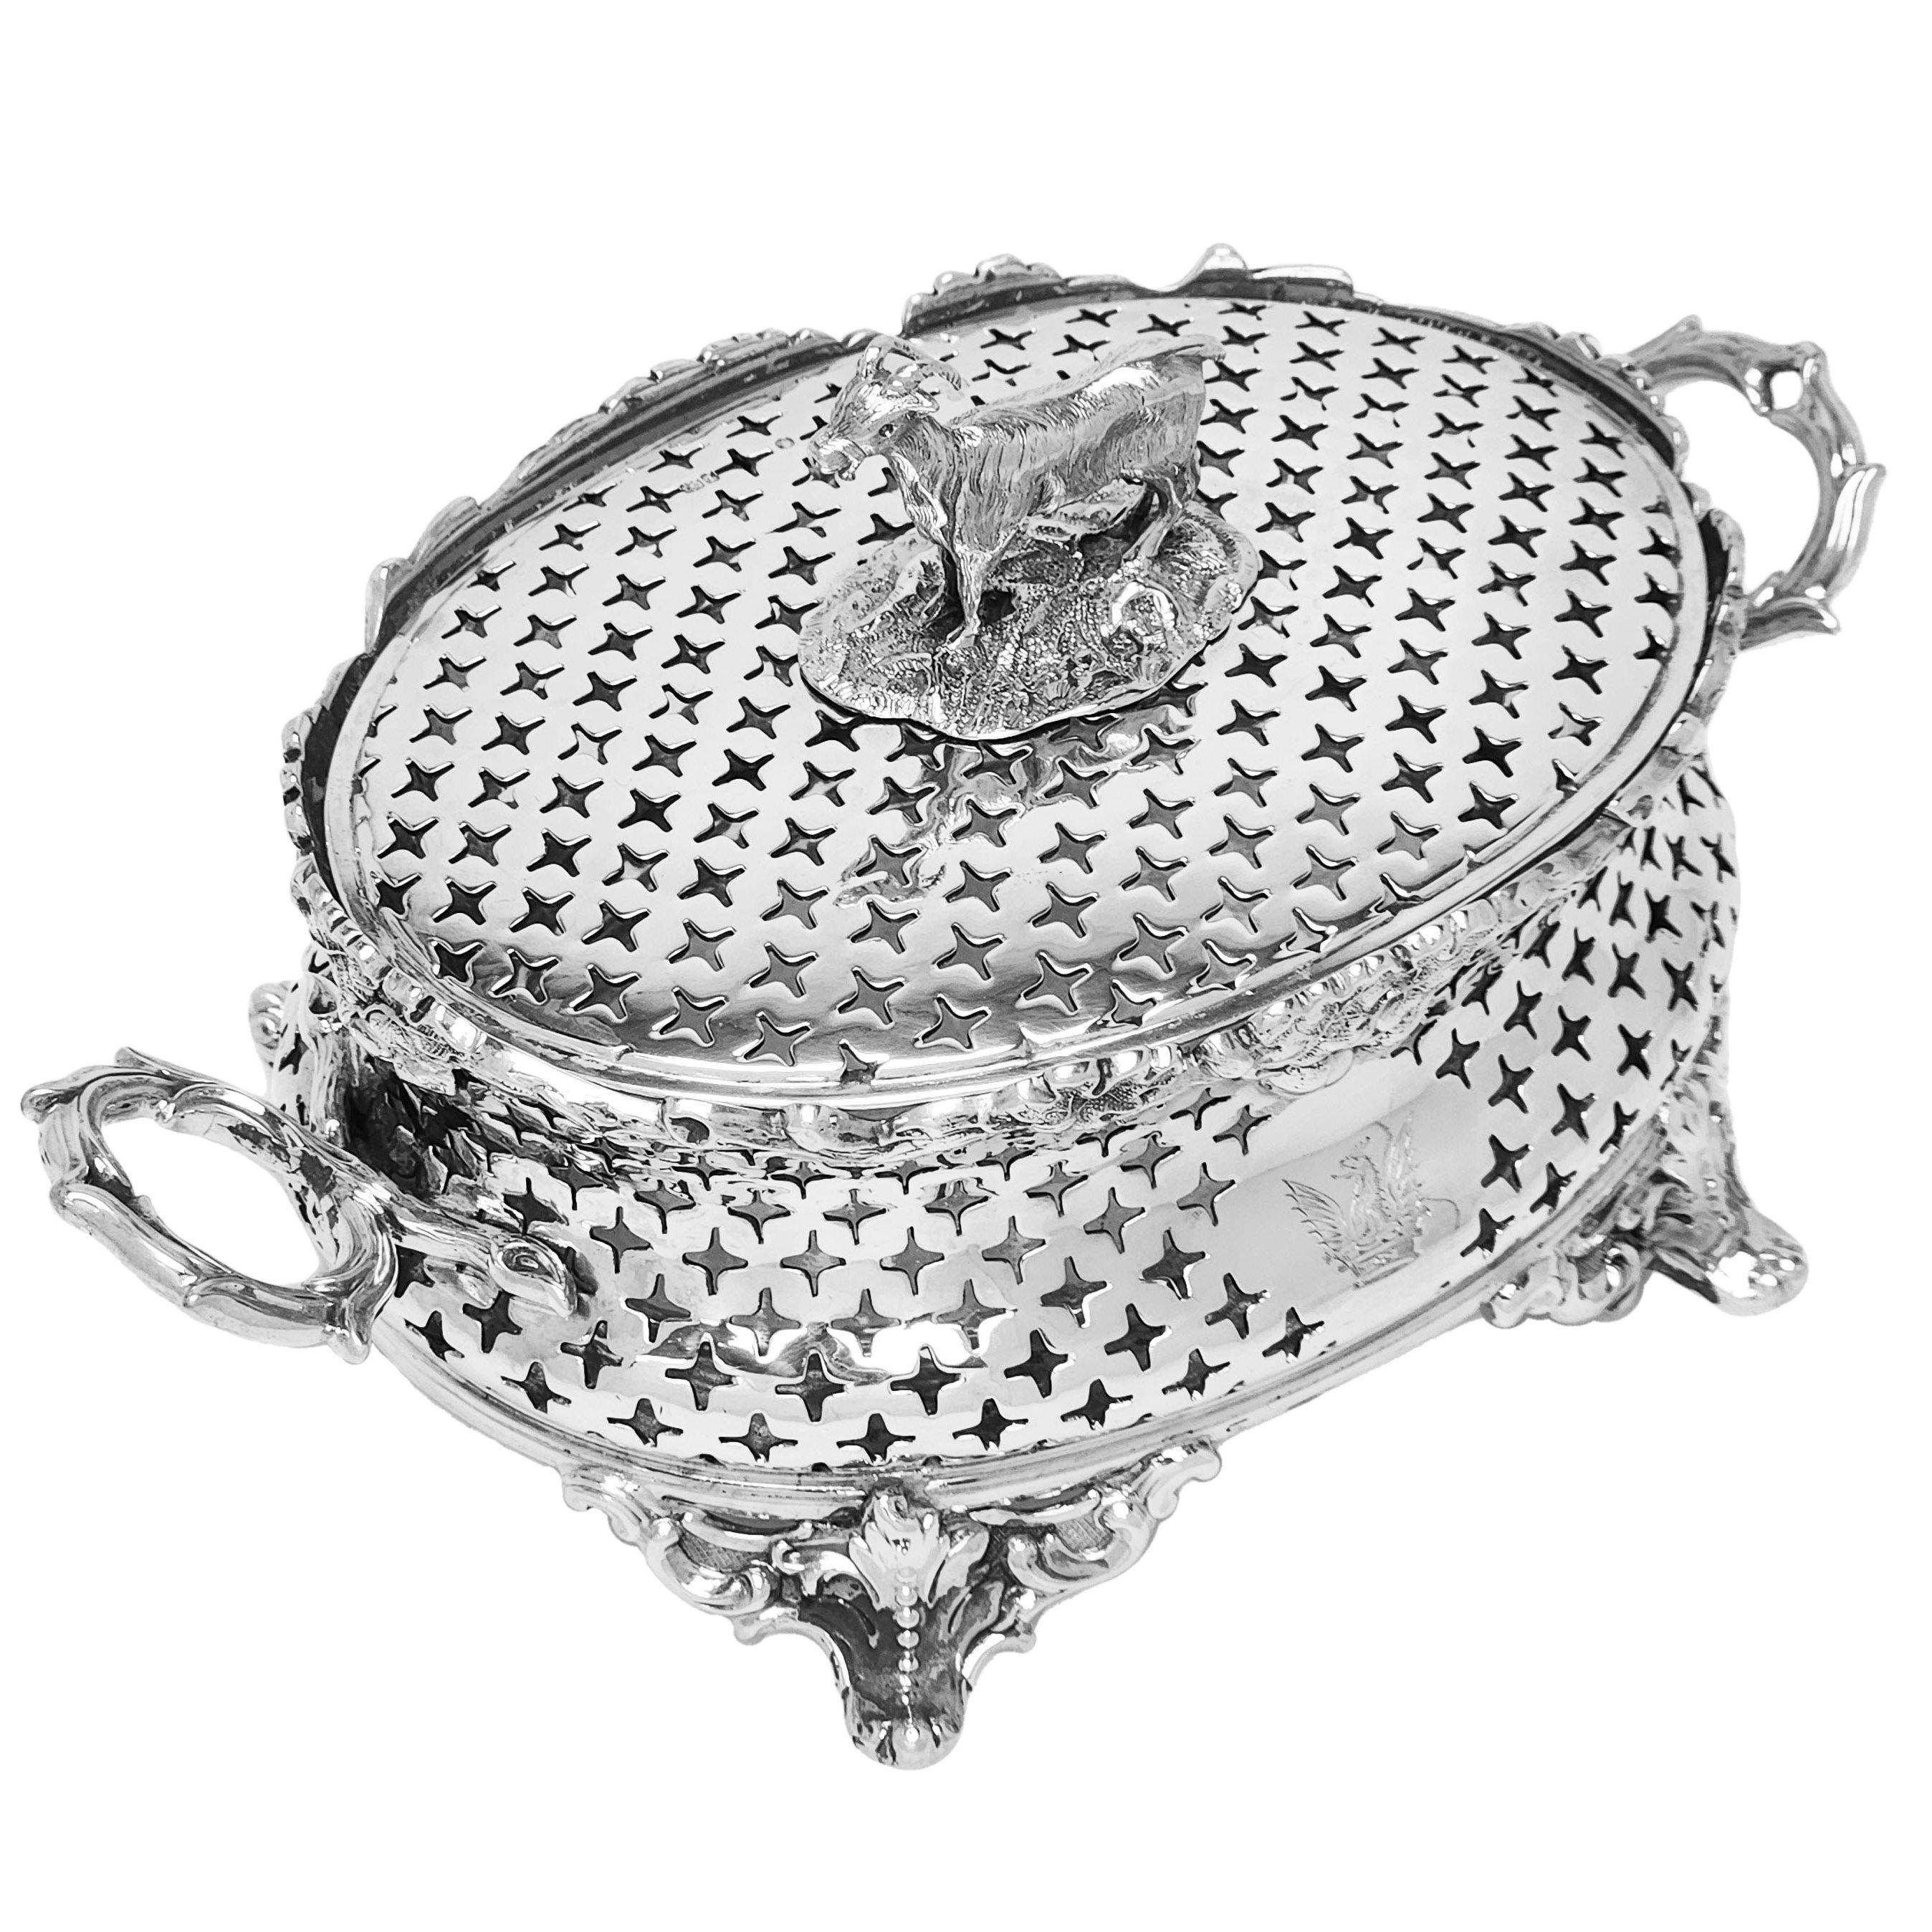 A lovely Antique Victorian Silver Butter Dish with a glass liner. This Lidded Victorian Butter Dish has an elegant pierced pattern on the body and lid. The lid is topped with a goat shaped finial and the base stands on four ornate feet. The Oval